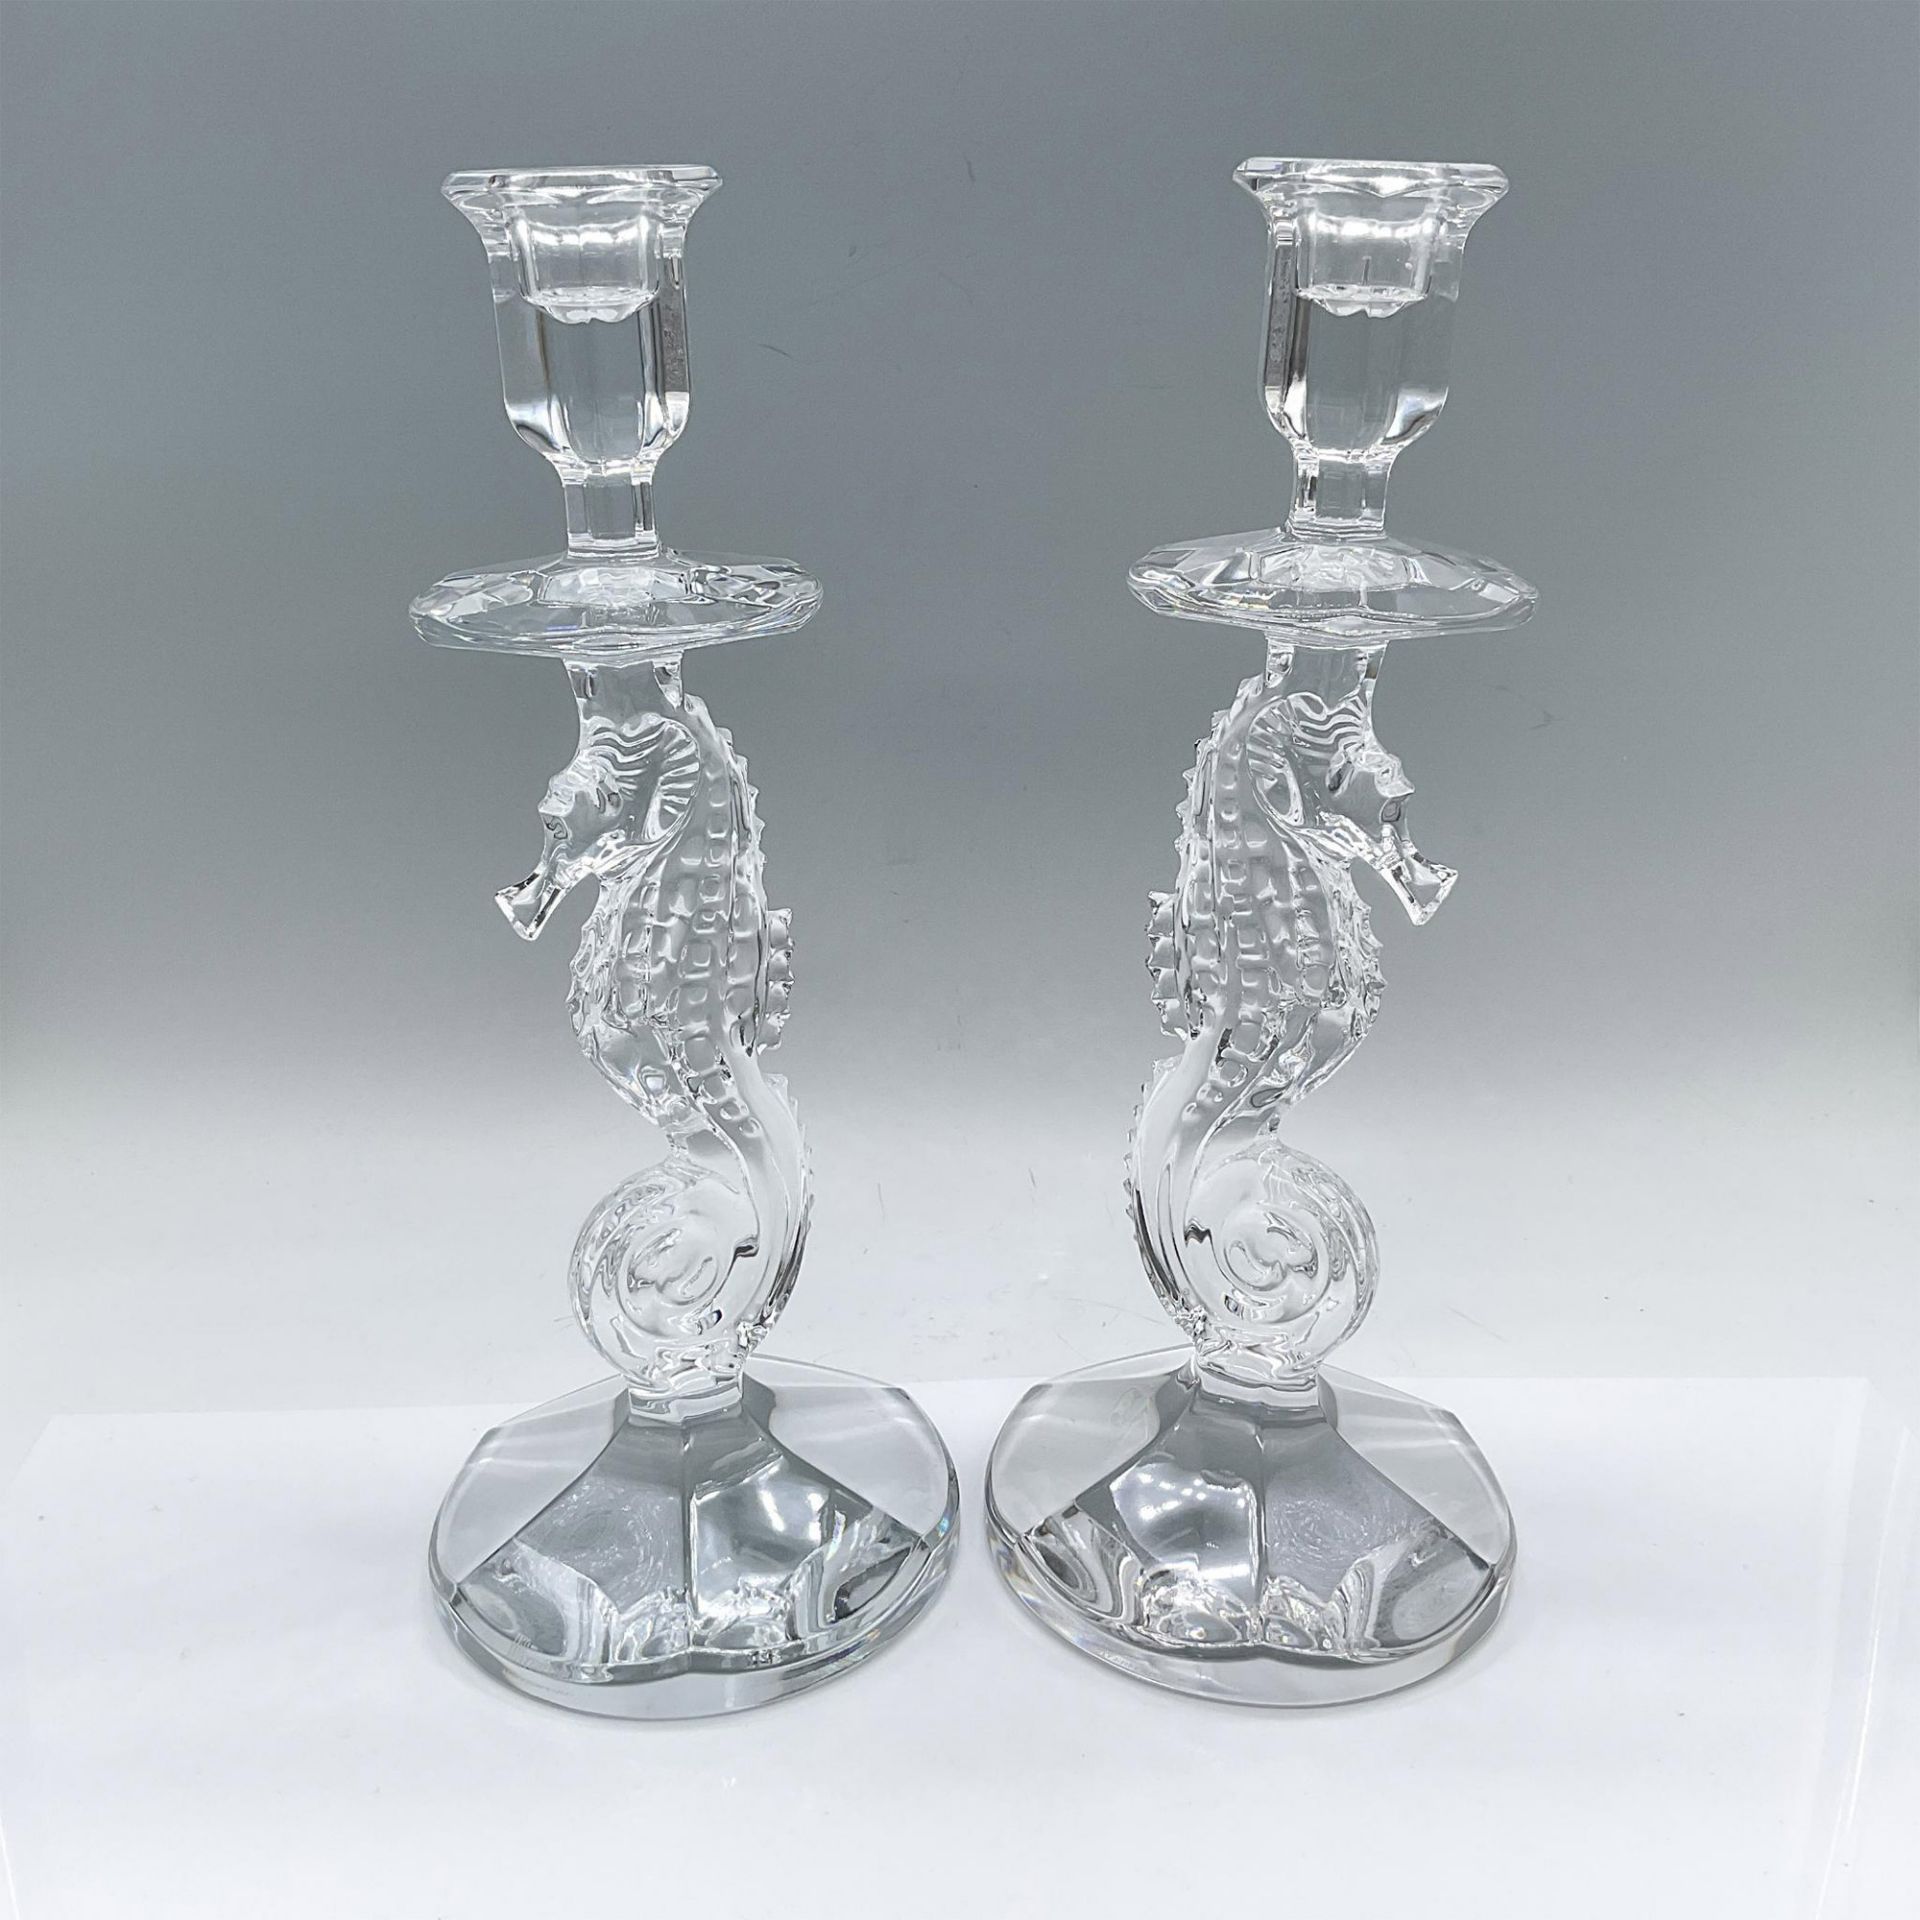 Pair of Waterford Crystal Candlesticks, Seahorse - Image 2 of 3